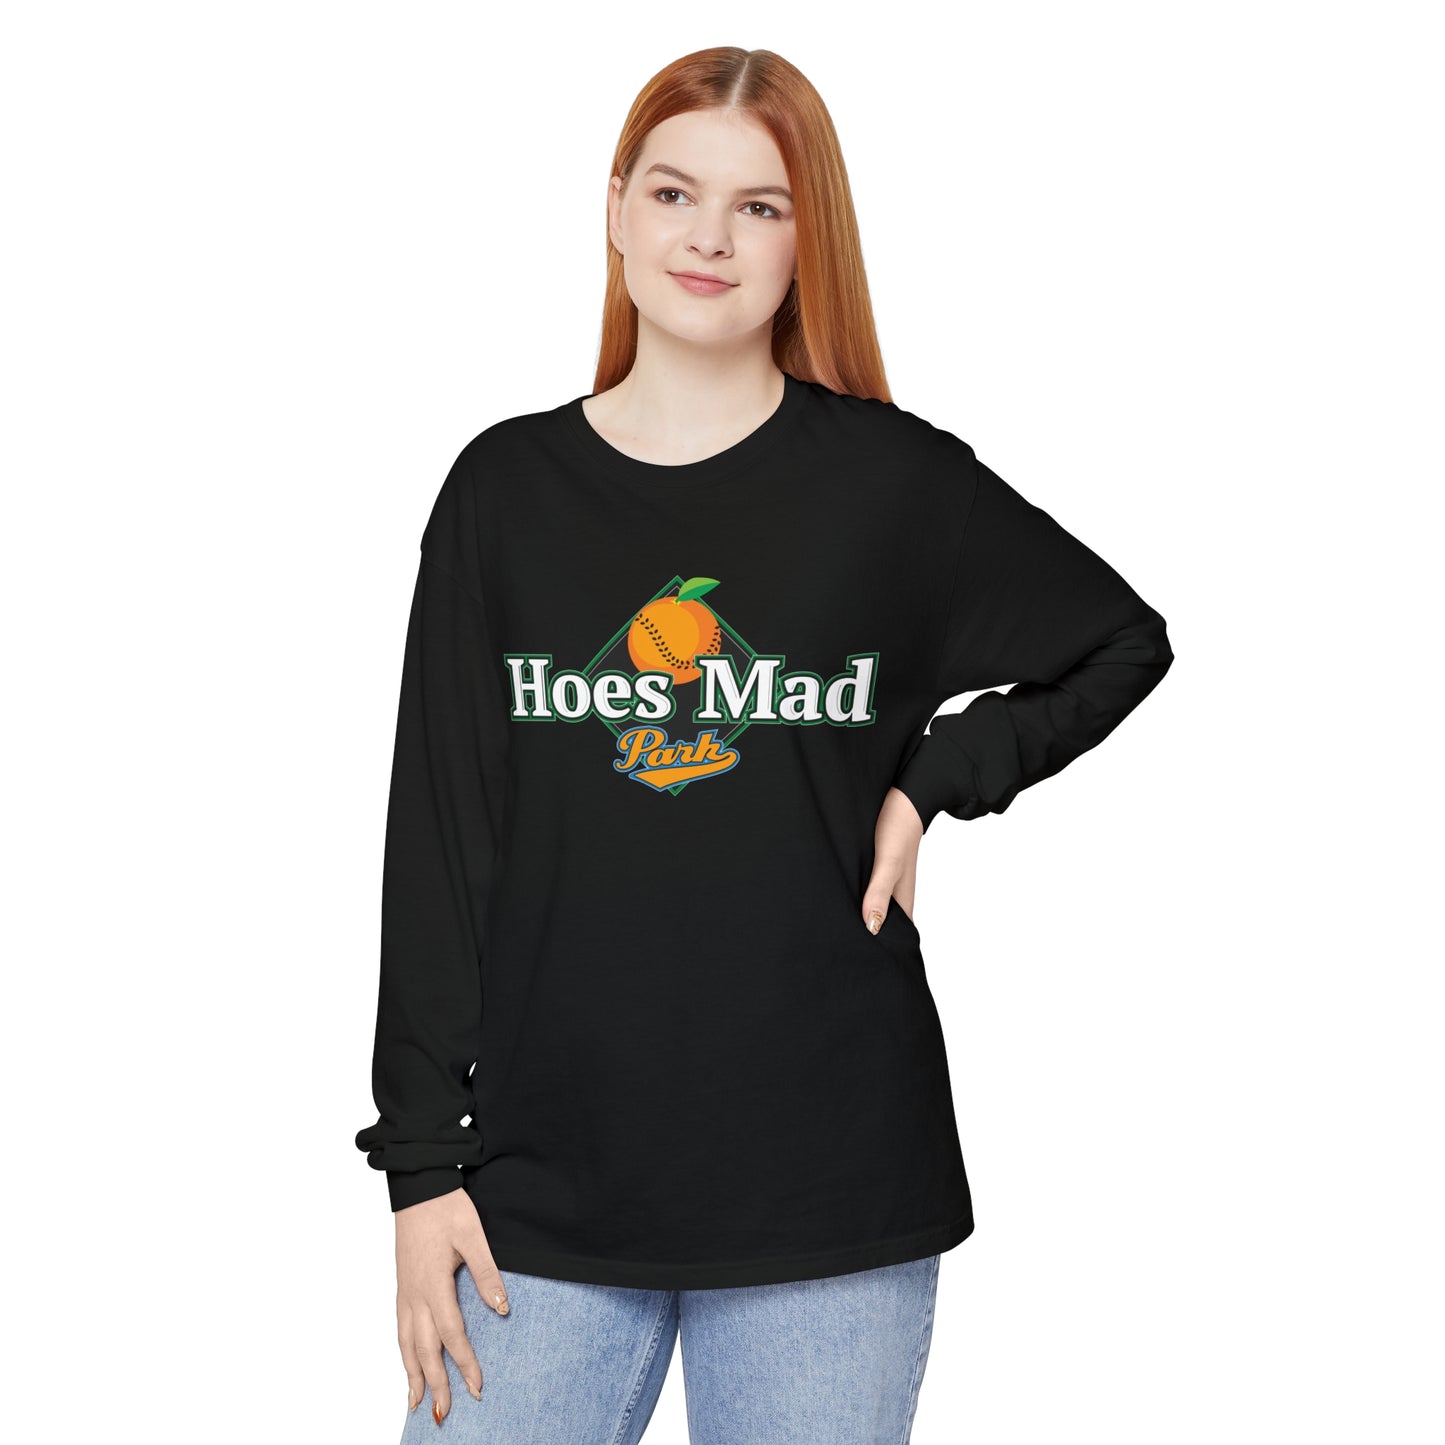 Hoes Mad Long Sleeve Tee